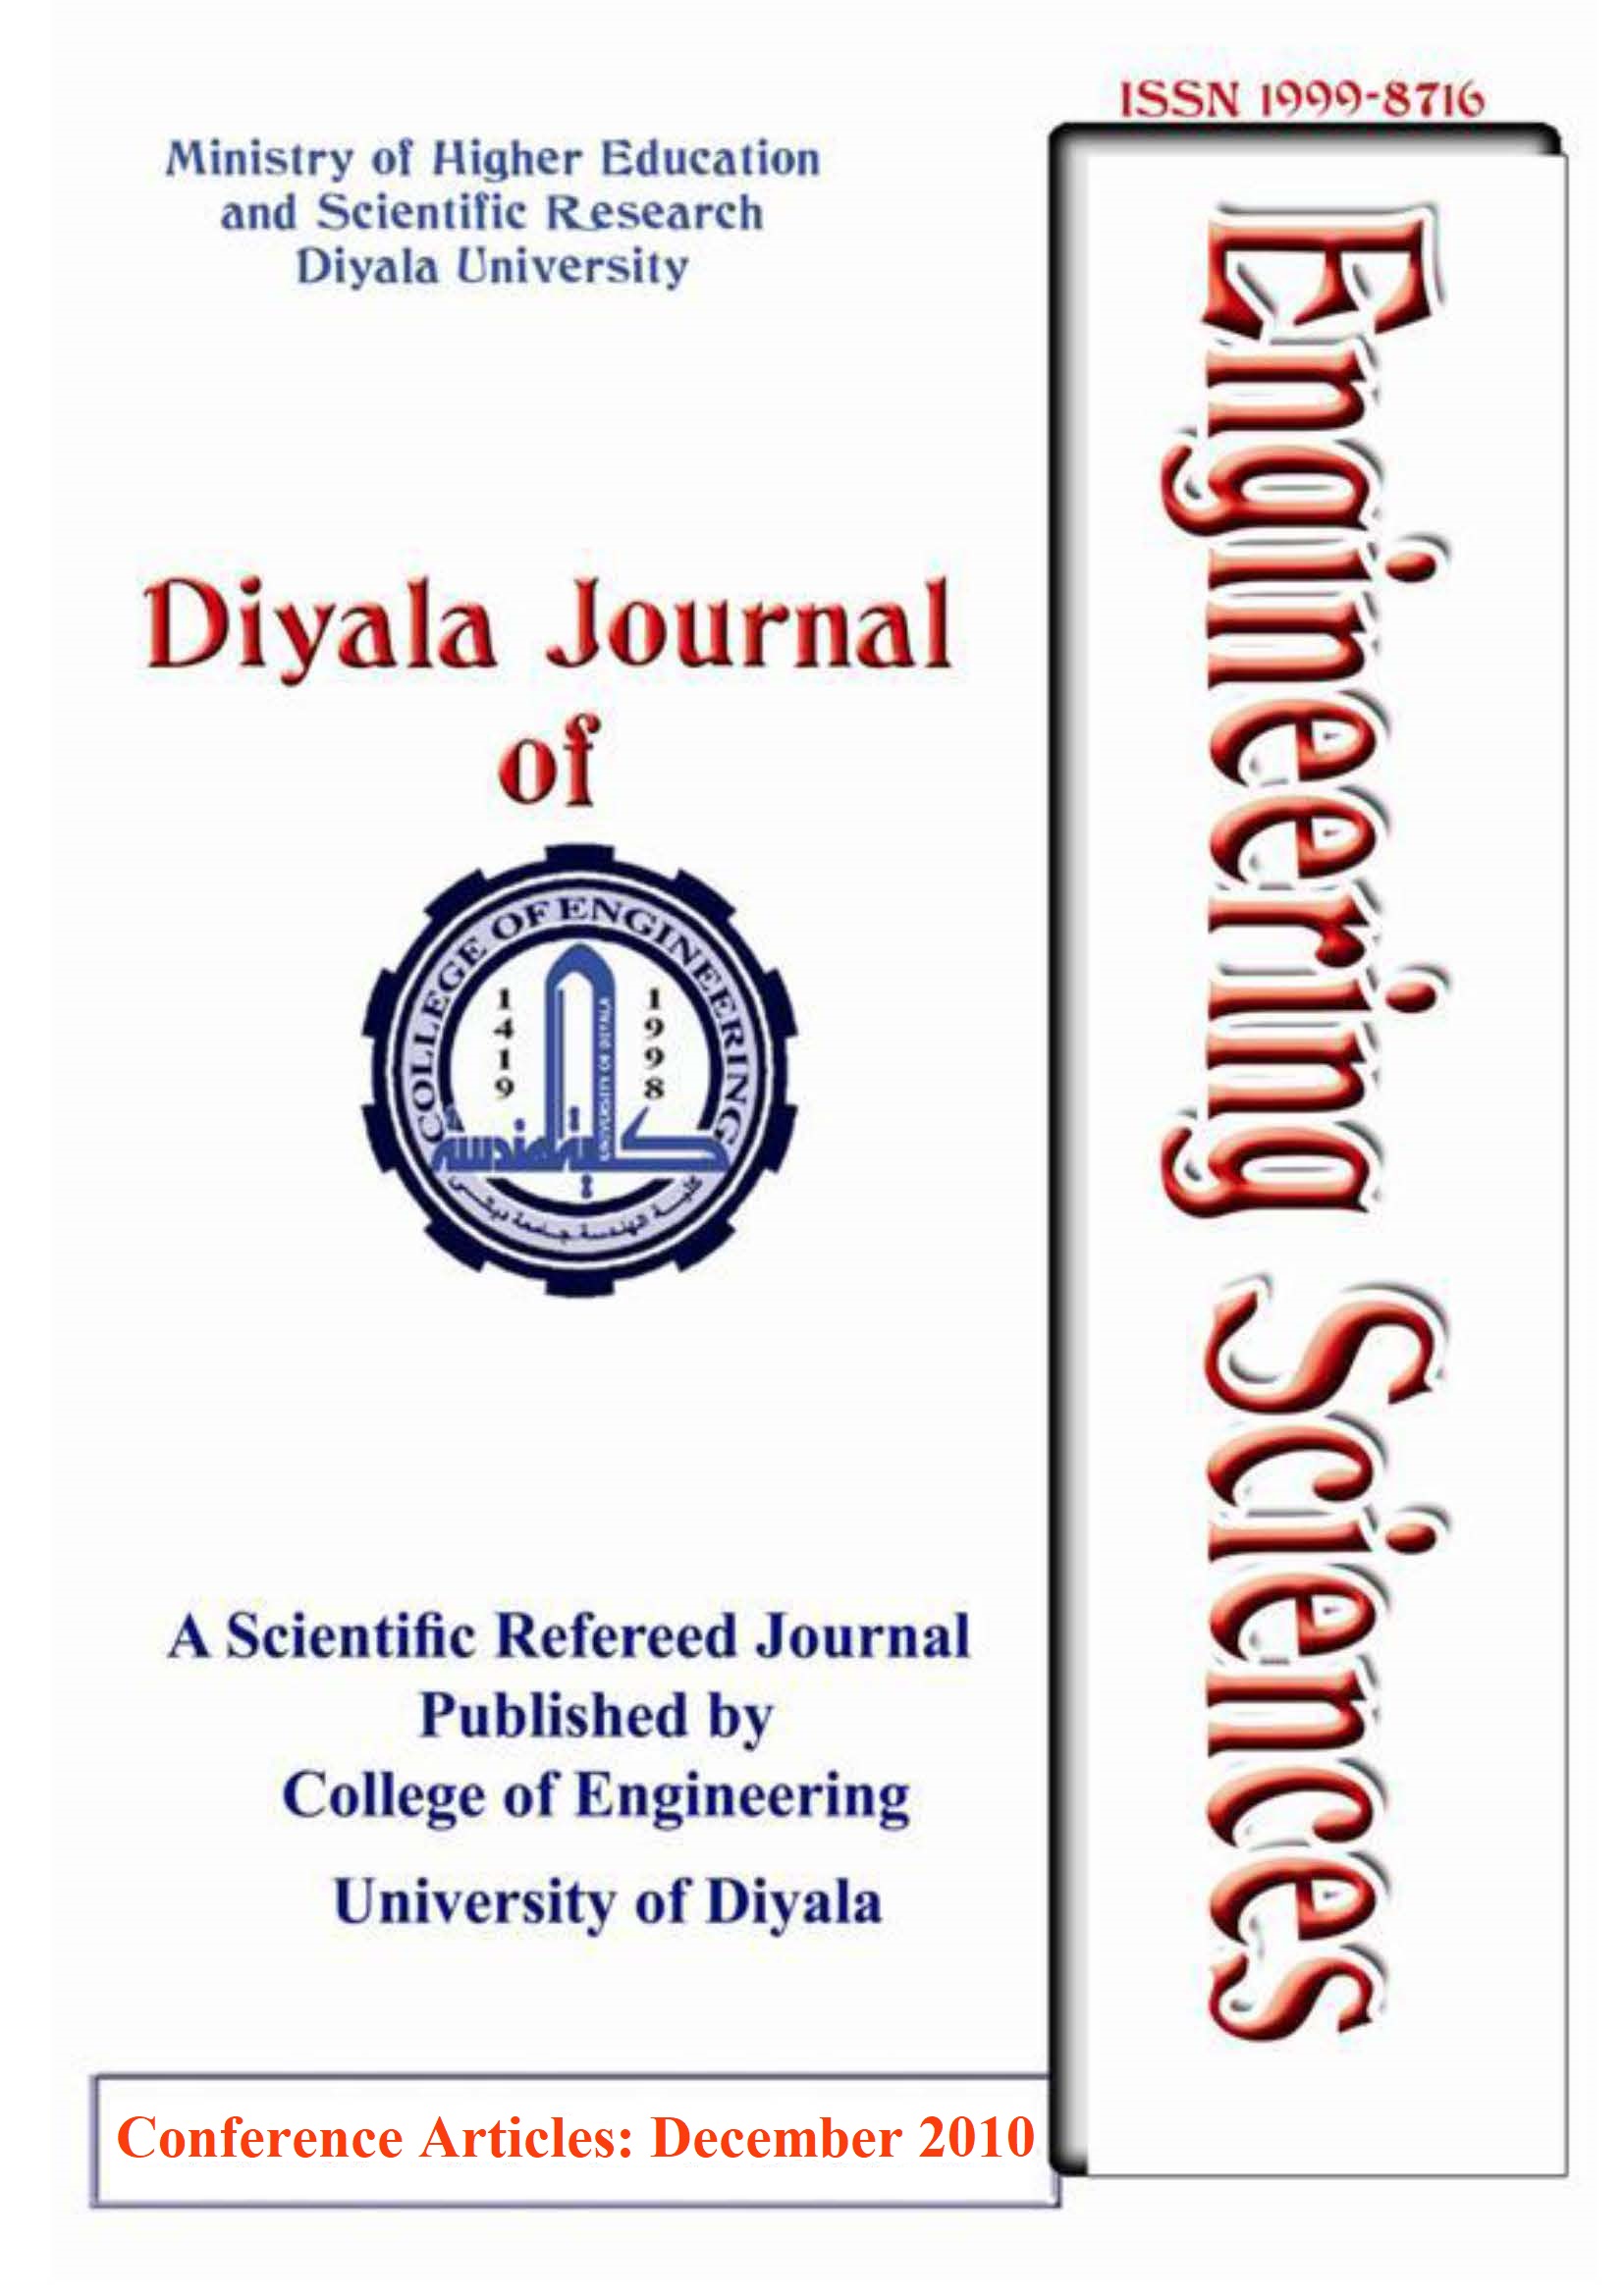 					View 2010: Diyala Journal of Engineering Sciences Conference, Conference Articles
				